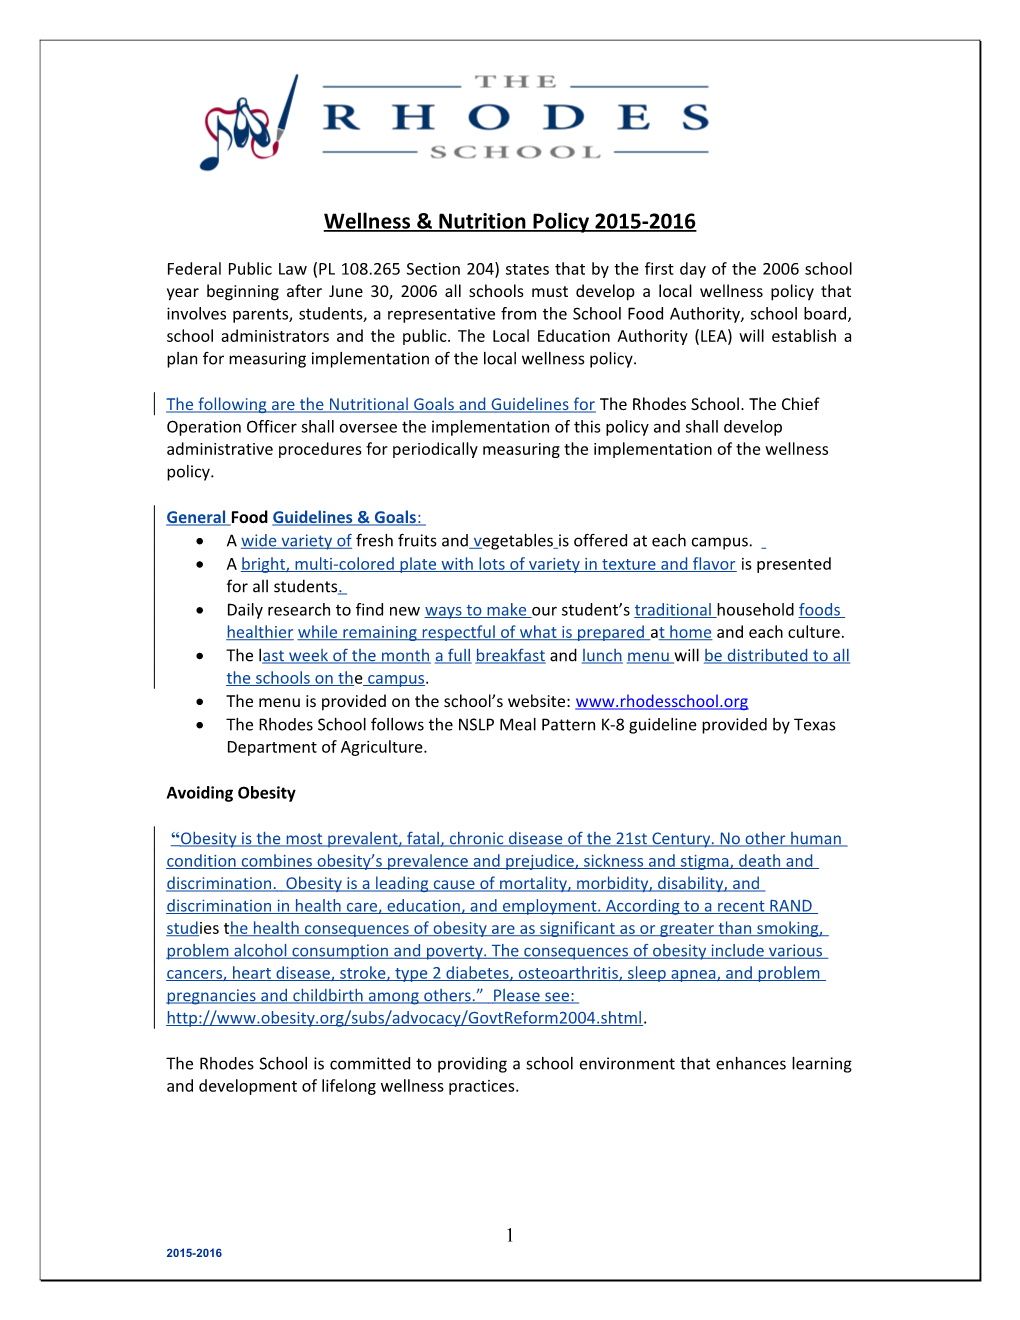 Wellness & Nutrition Policy 2015-2016